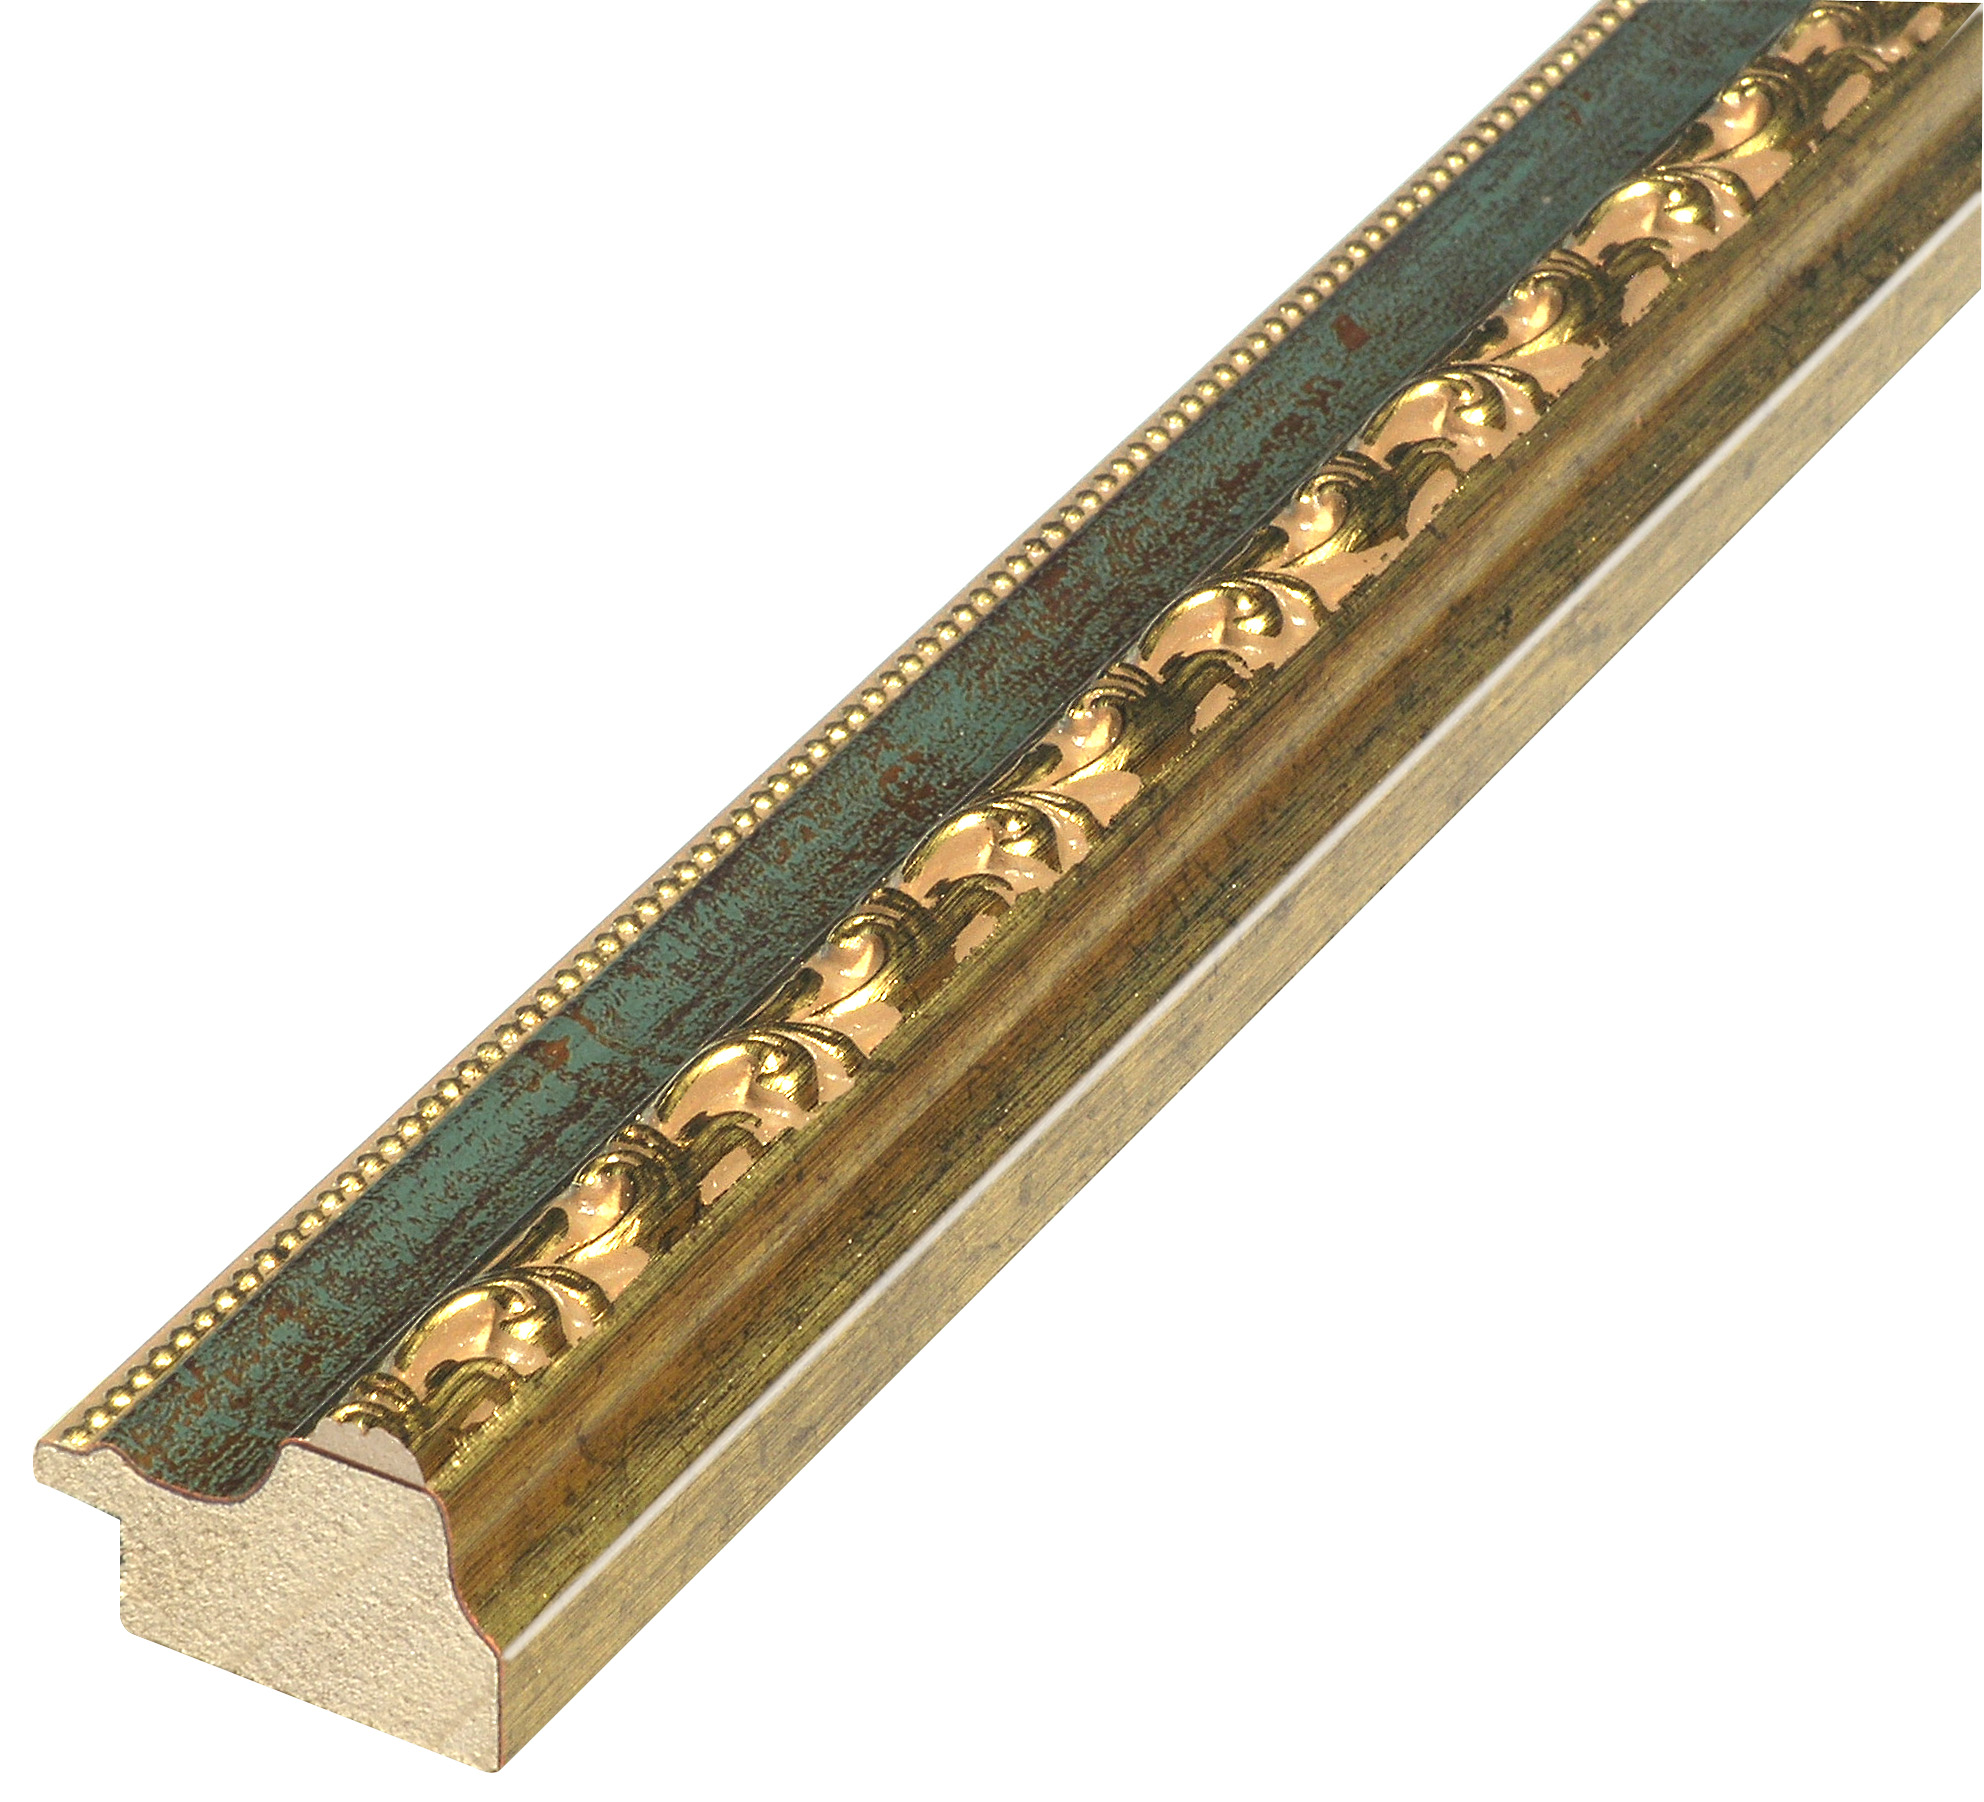 Moulding finger-jointed pine width 32mm - green with gold decorations